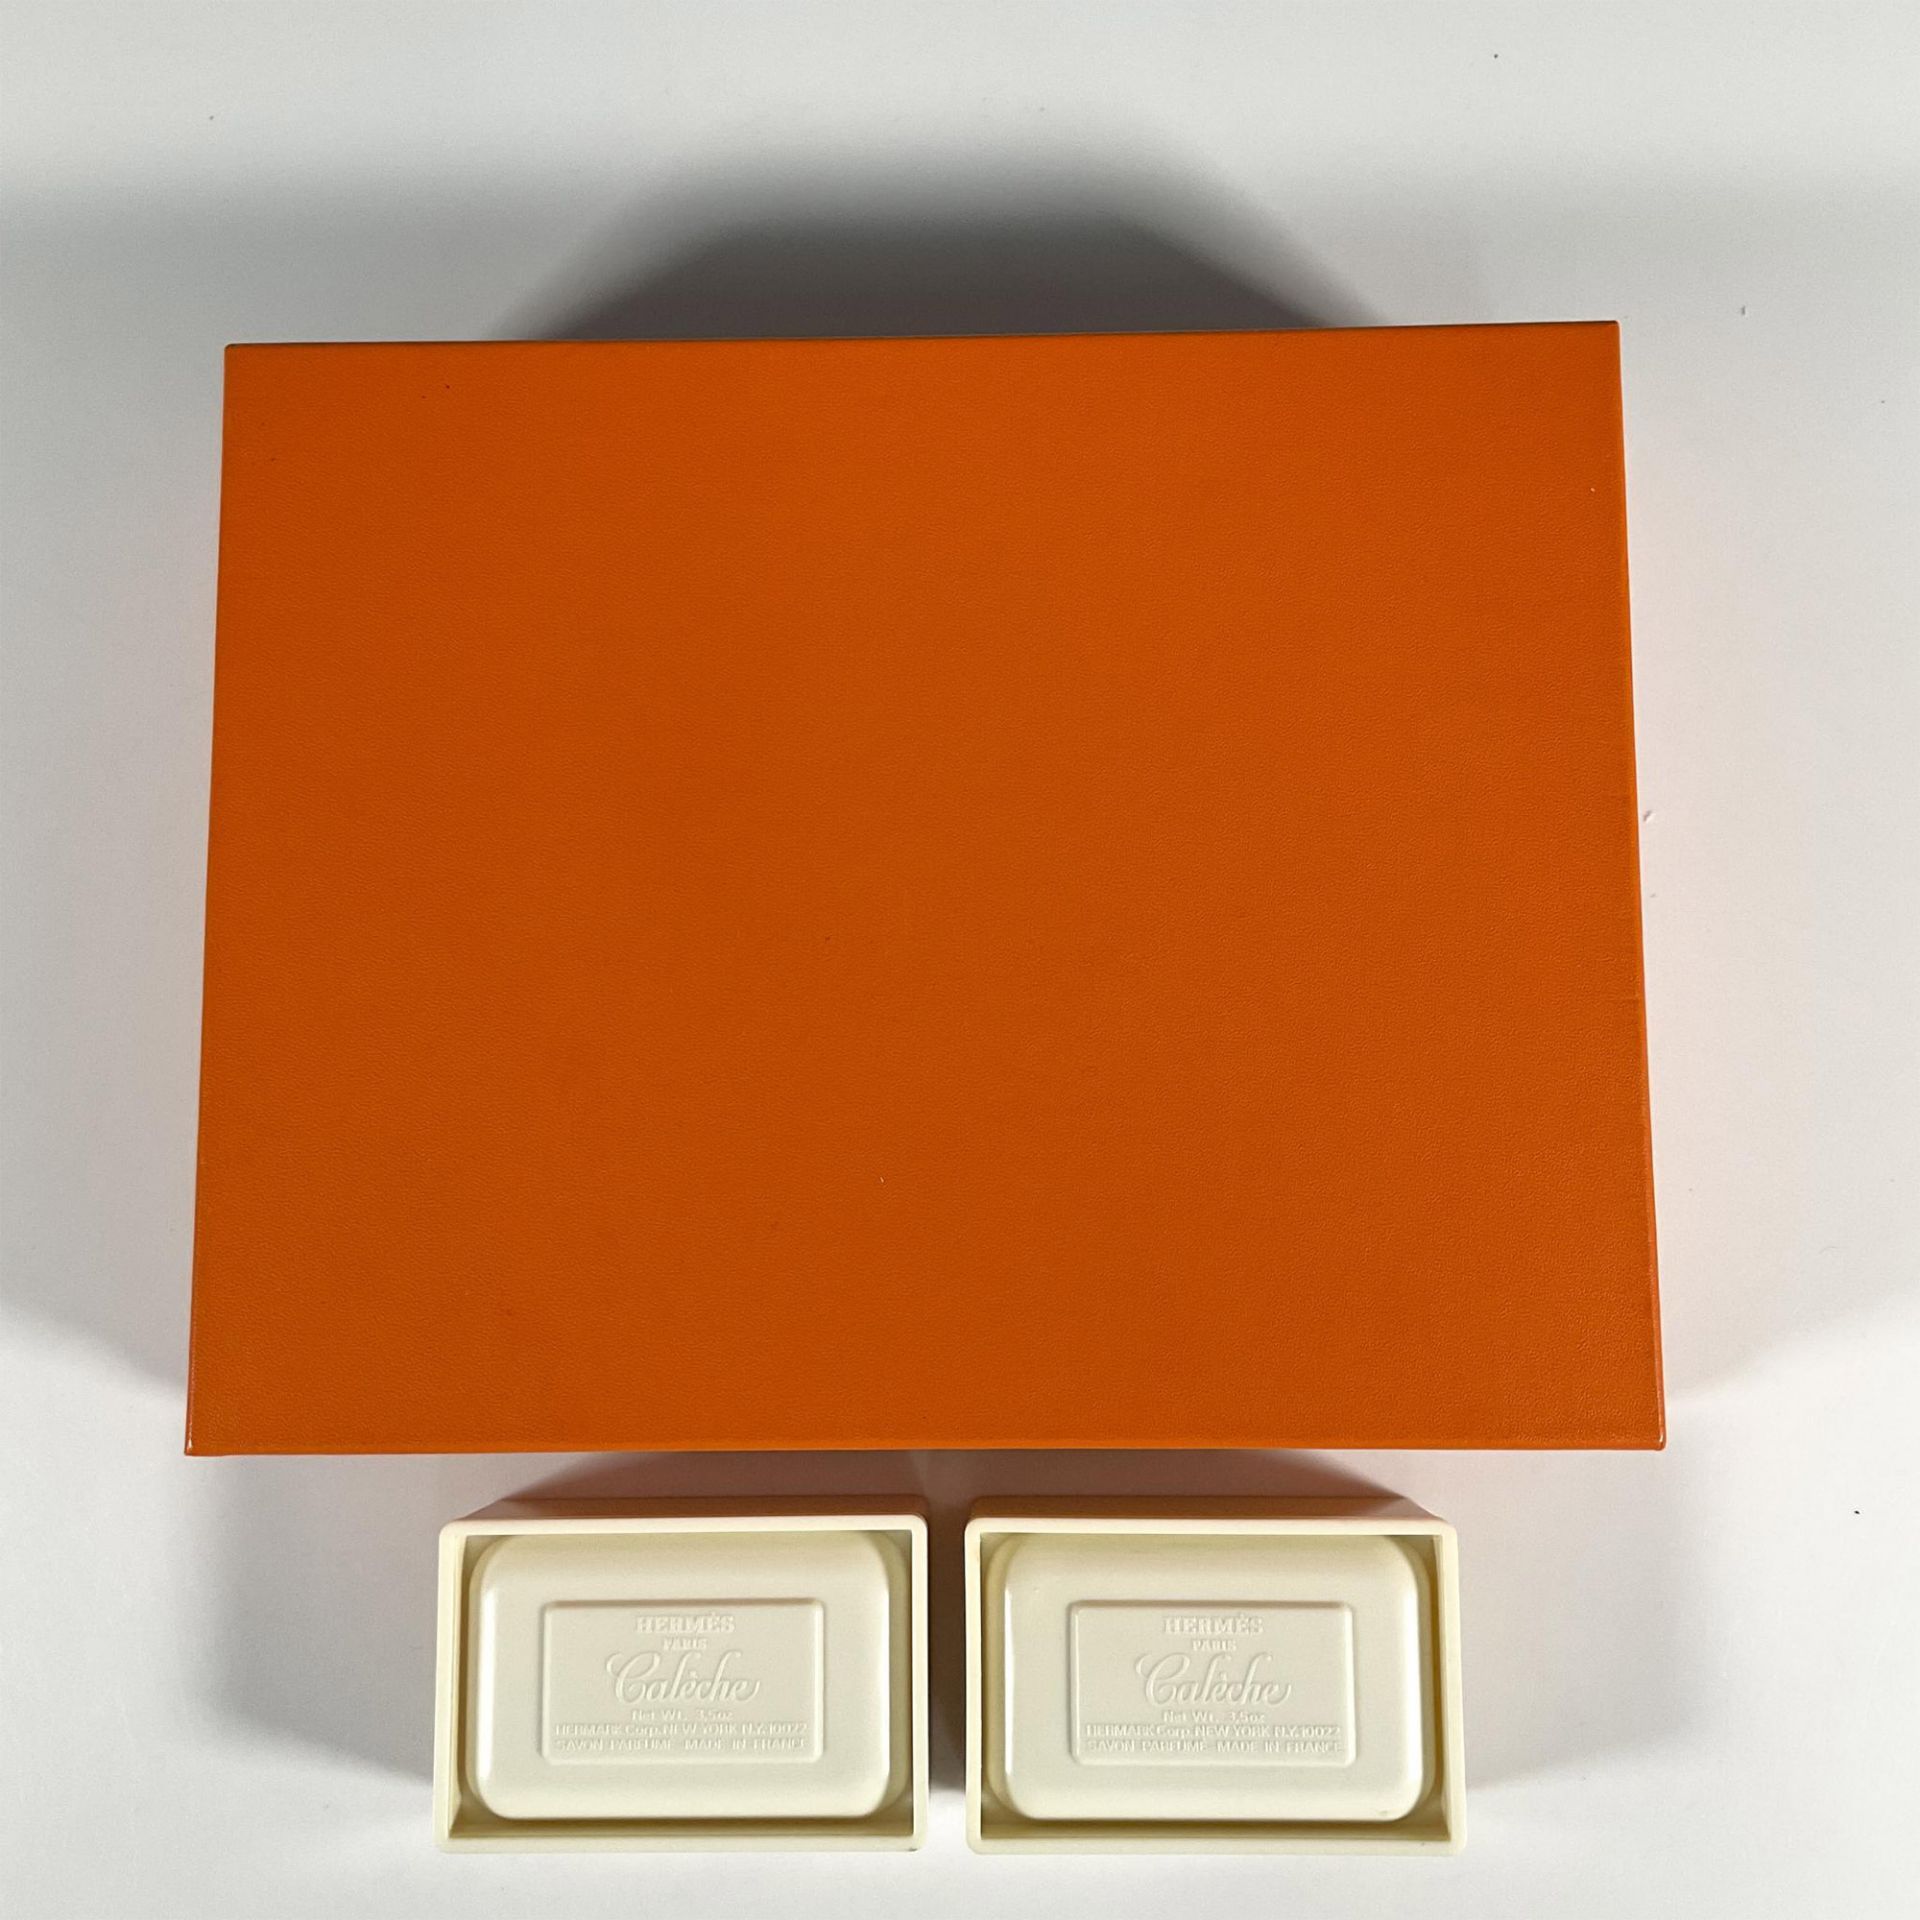 7pc Original Hermes Boxes, Various Sizes - Image 4 of 4